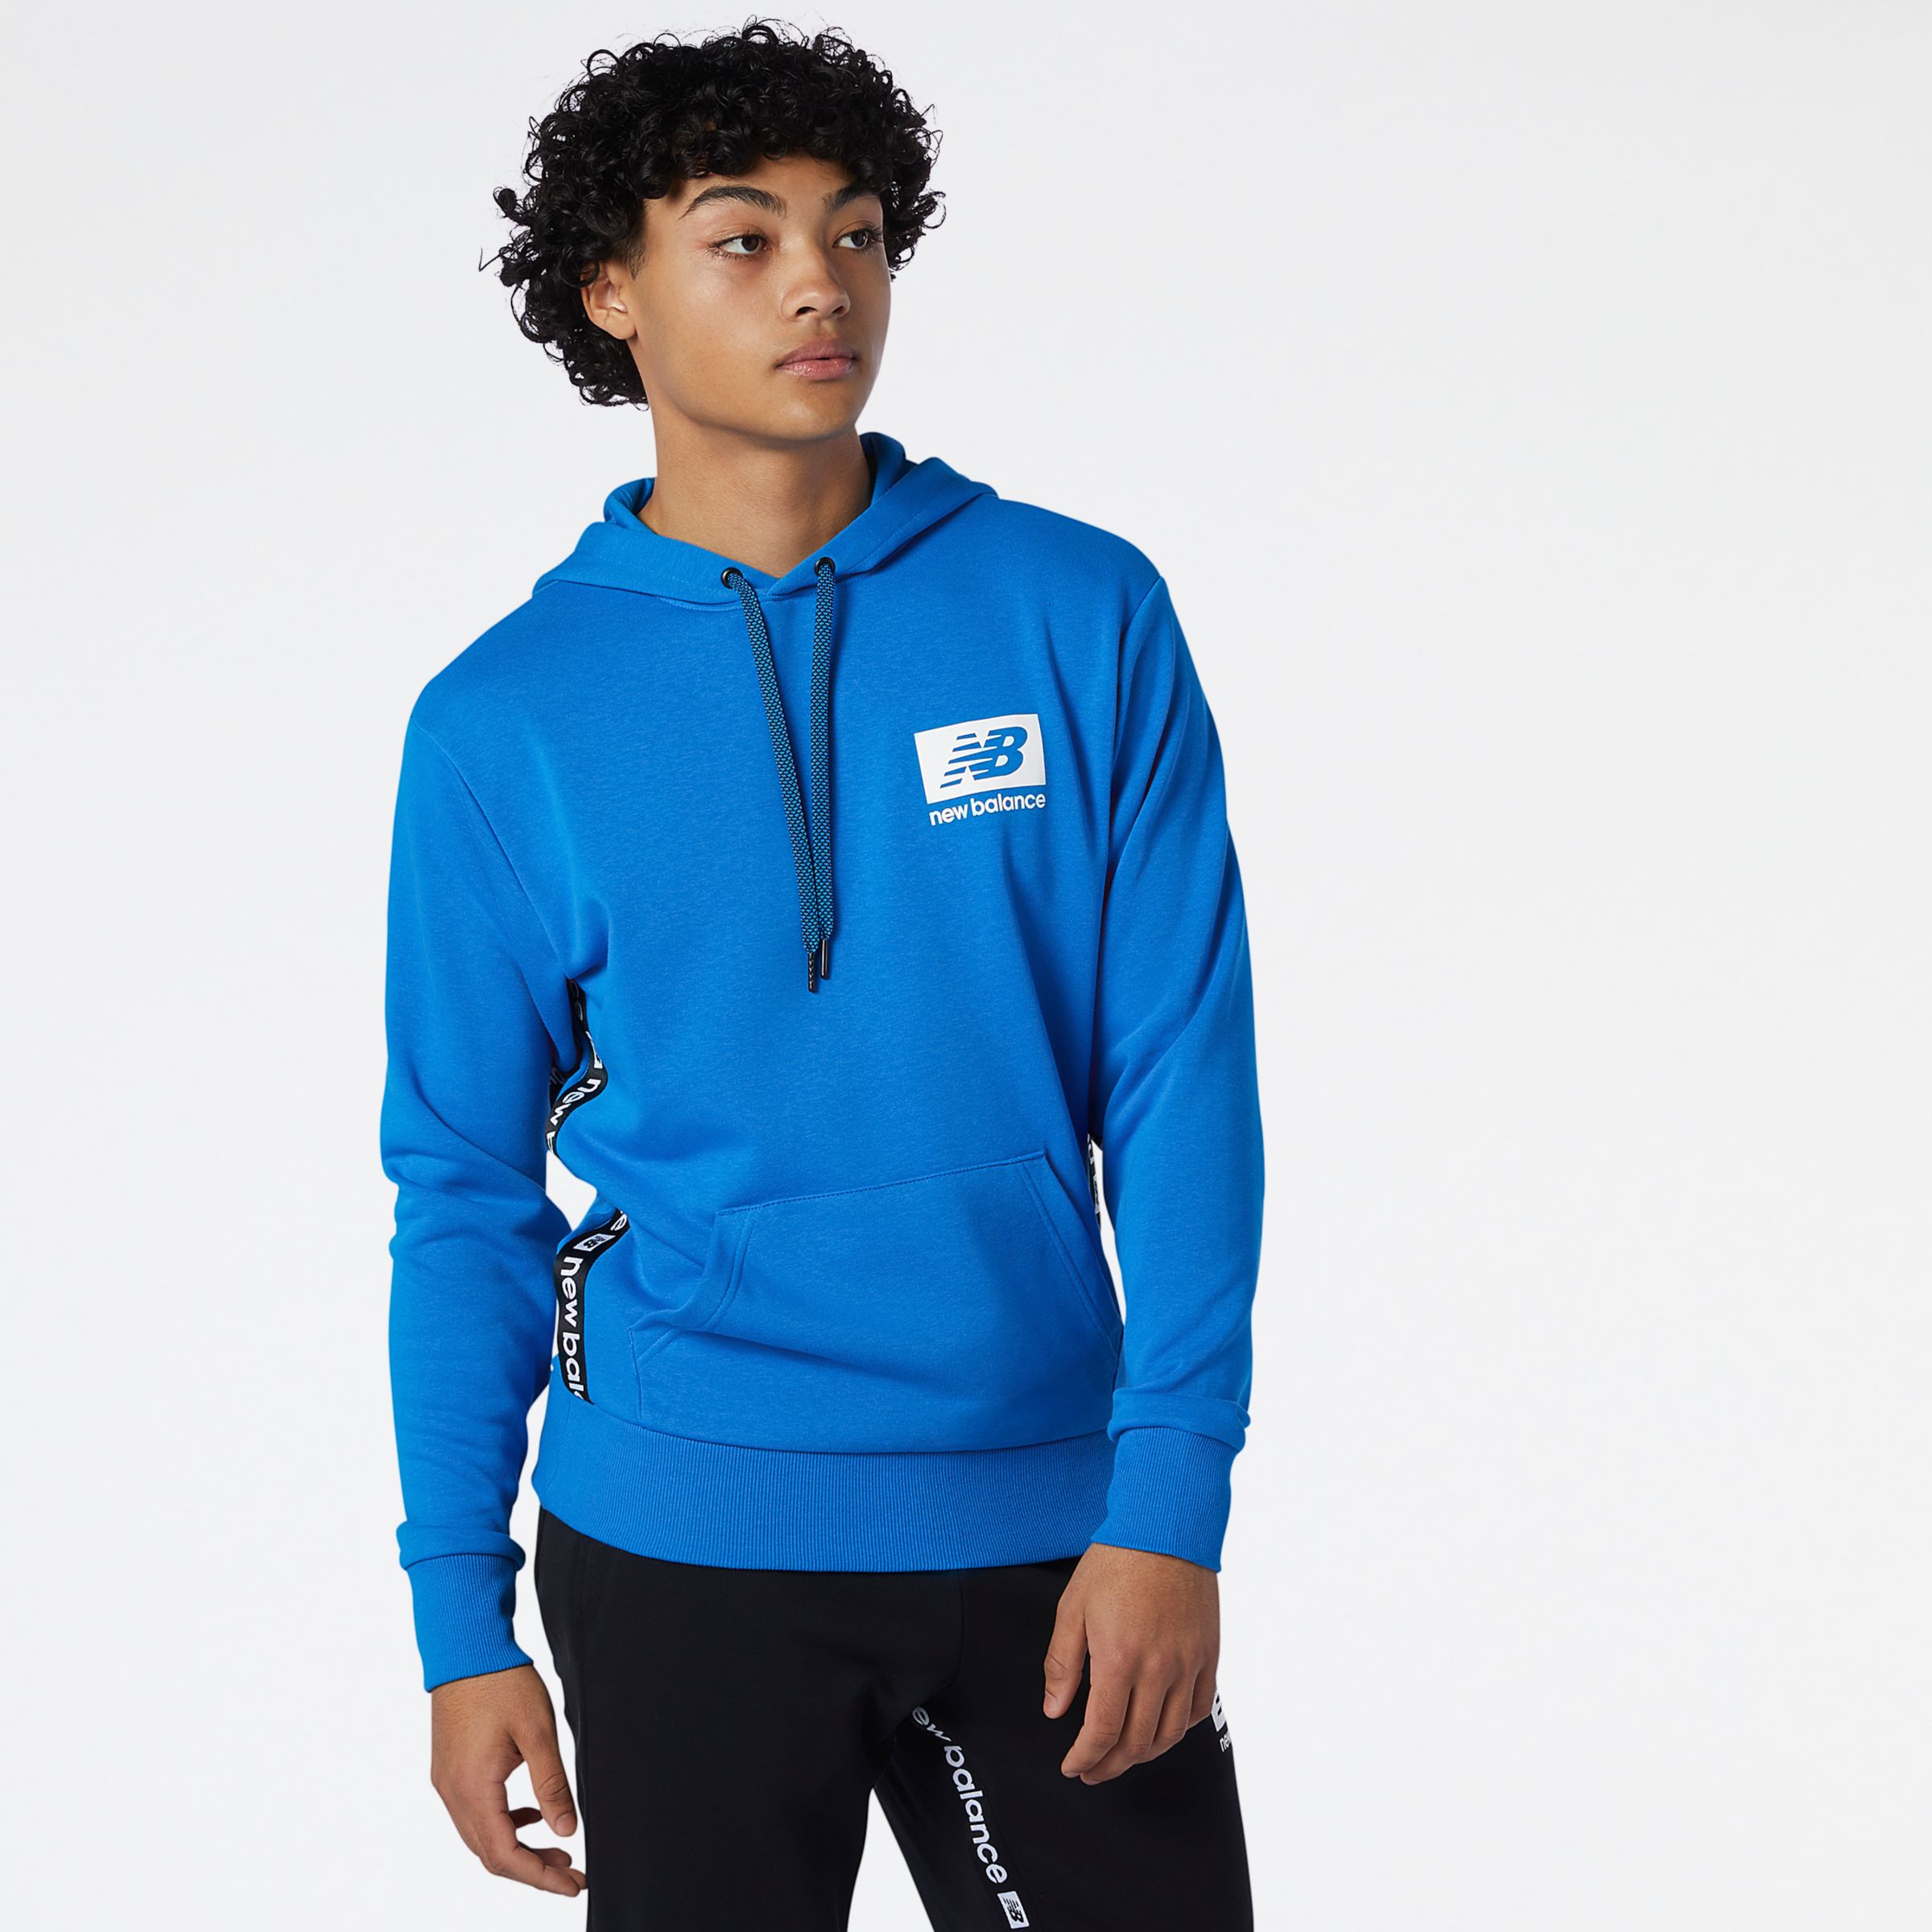 New Balance Men's NB Essentials Hoodie Blue on Joes New Balance Outlet ...